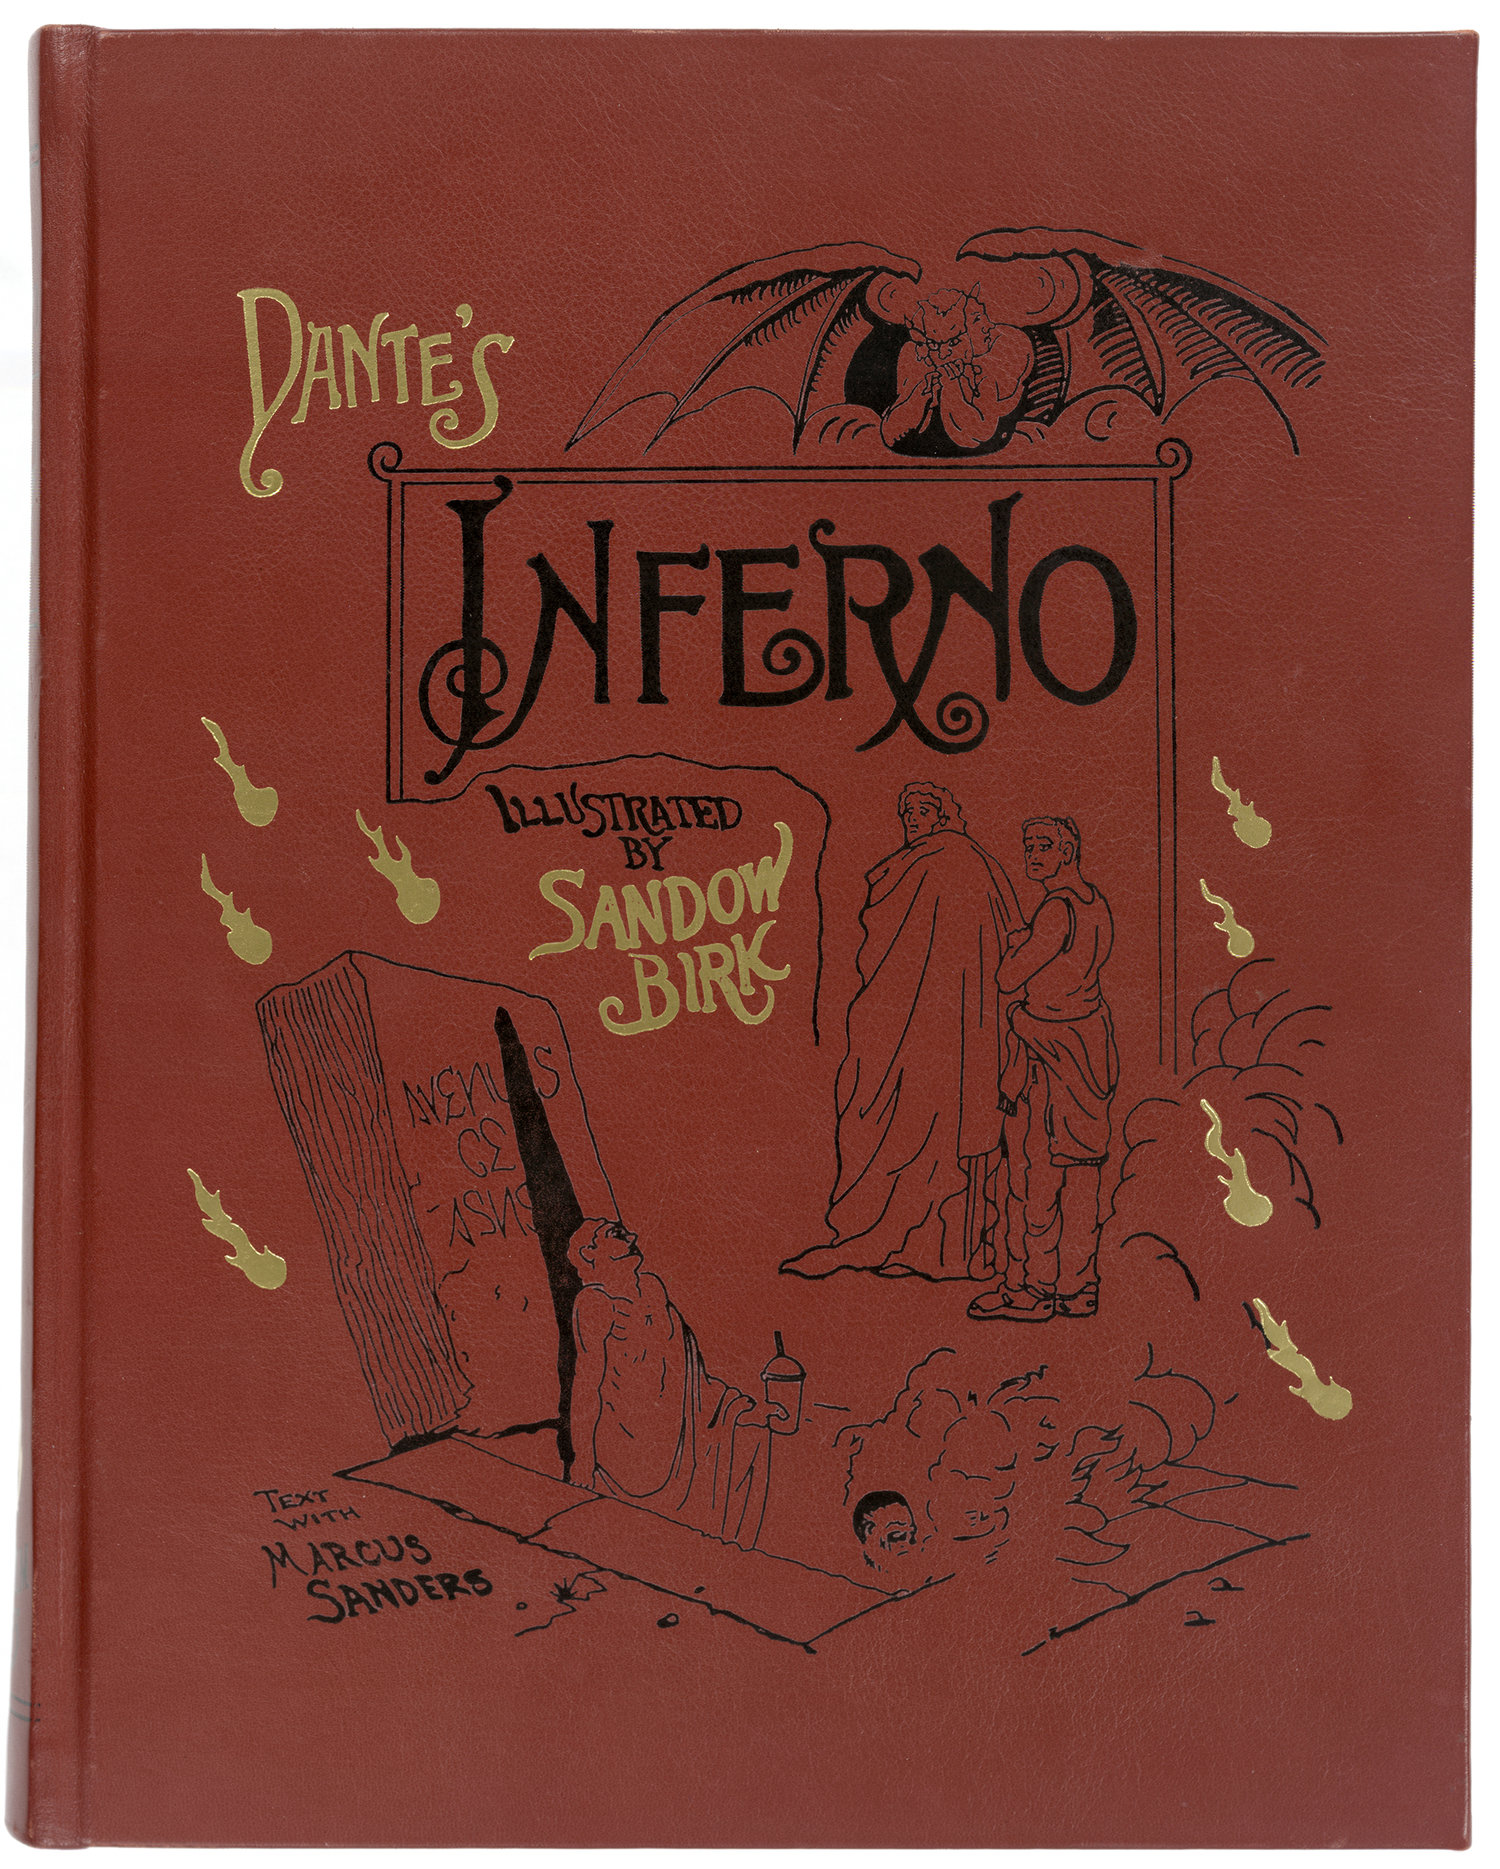 how long is dantes inferno book